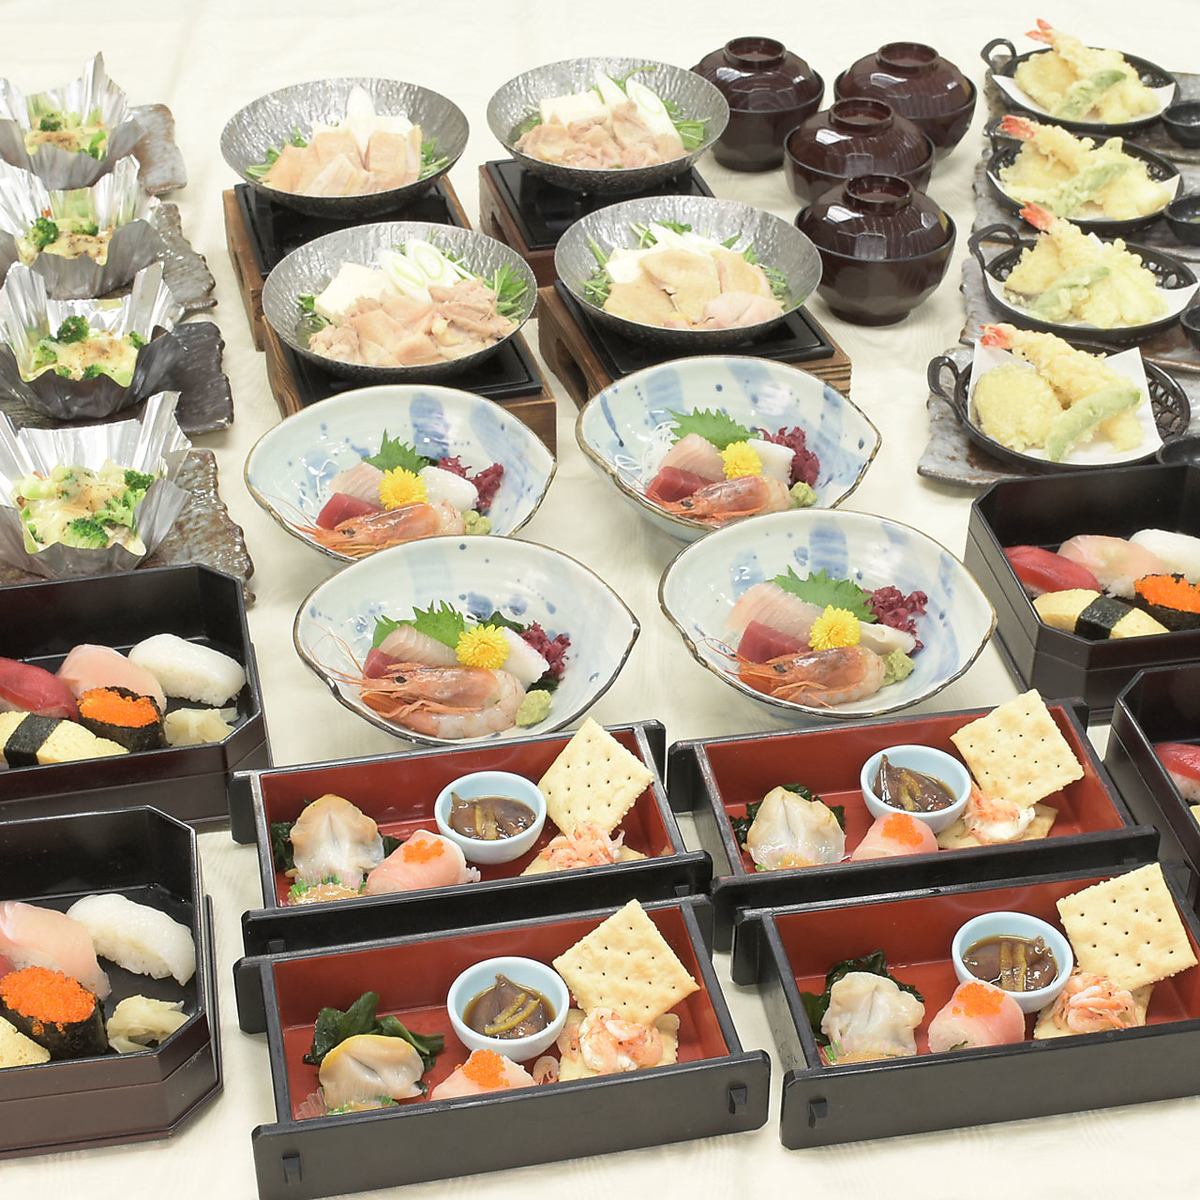 If you want to have a sushi party, go to Ginzo♪ Right next to Kokubunji Station